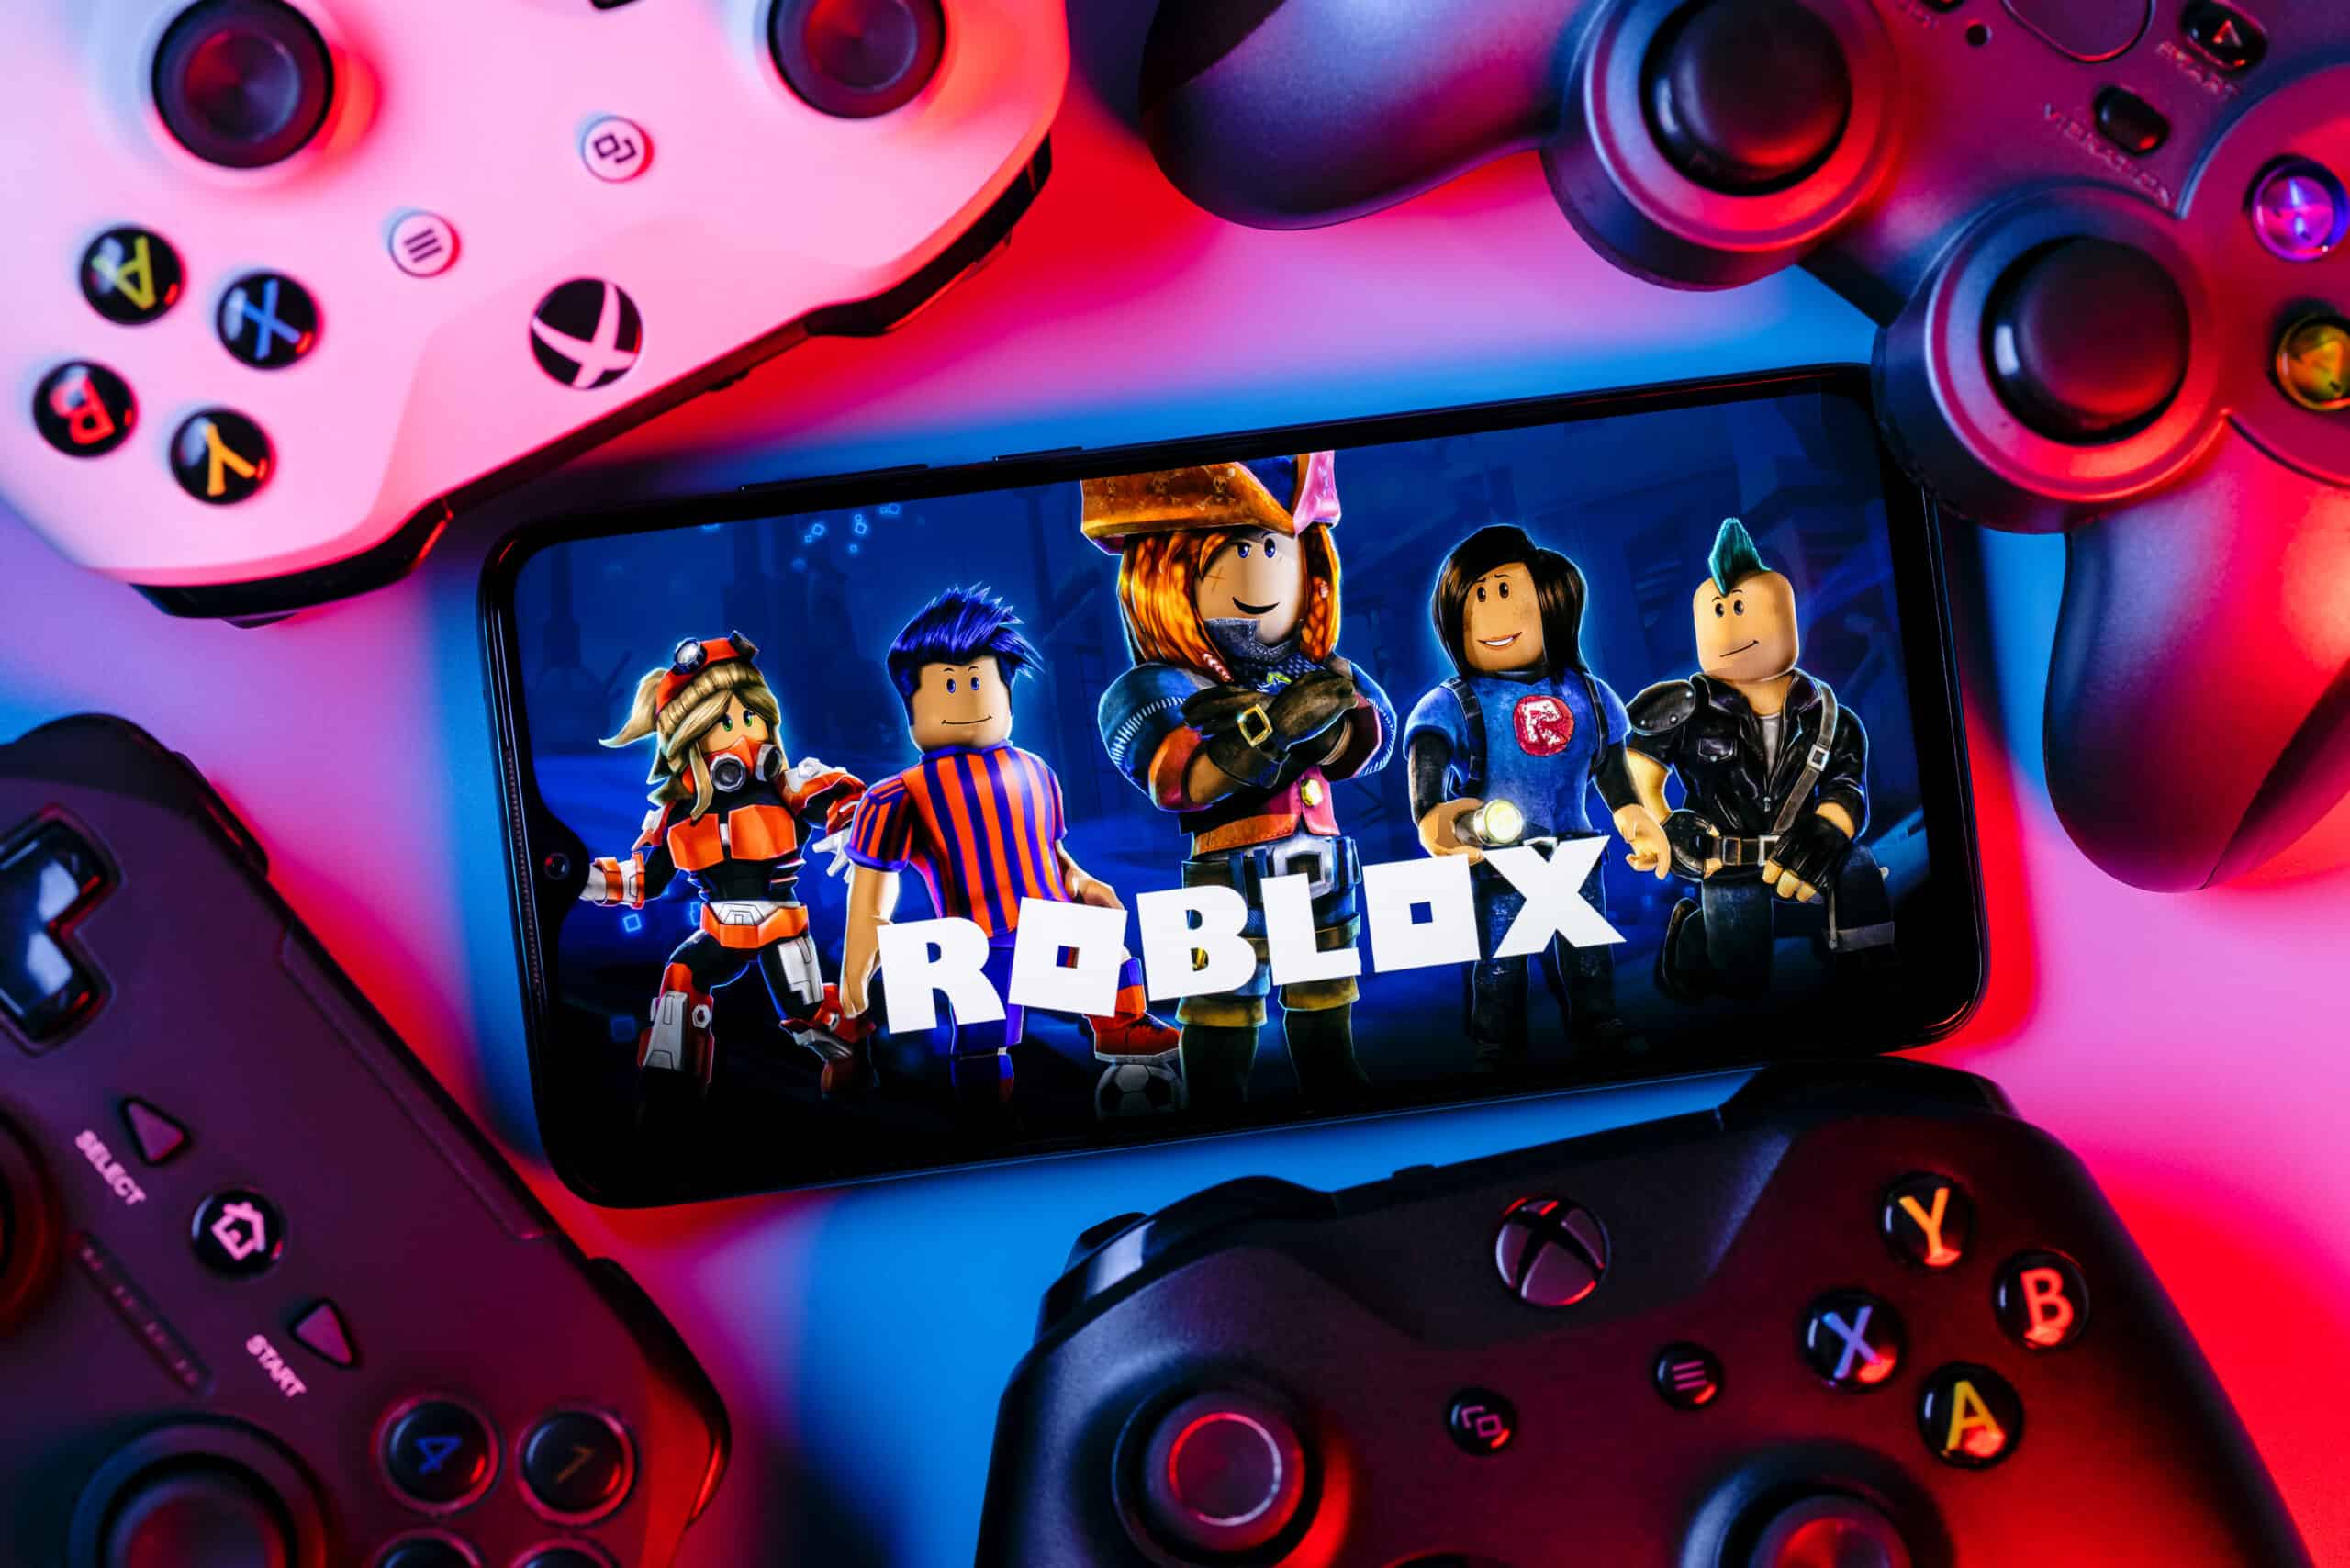 How to Get Roblox on Nintendo Switch in 8 Steps (with Photos